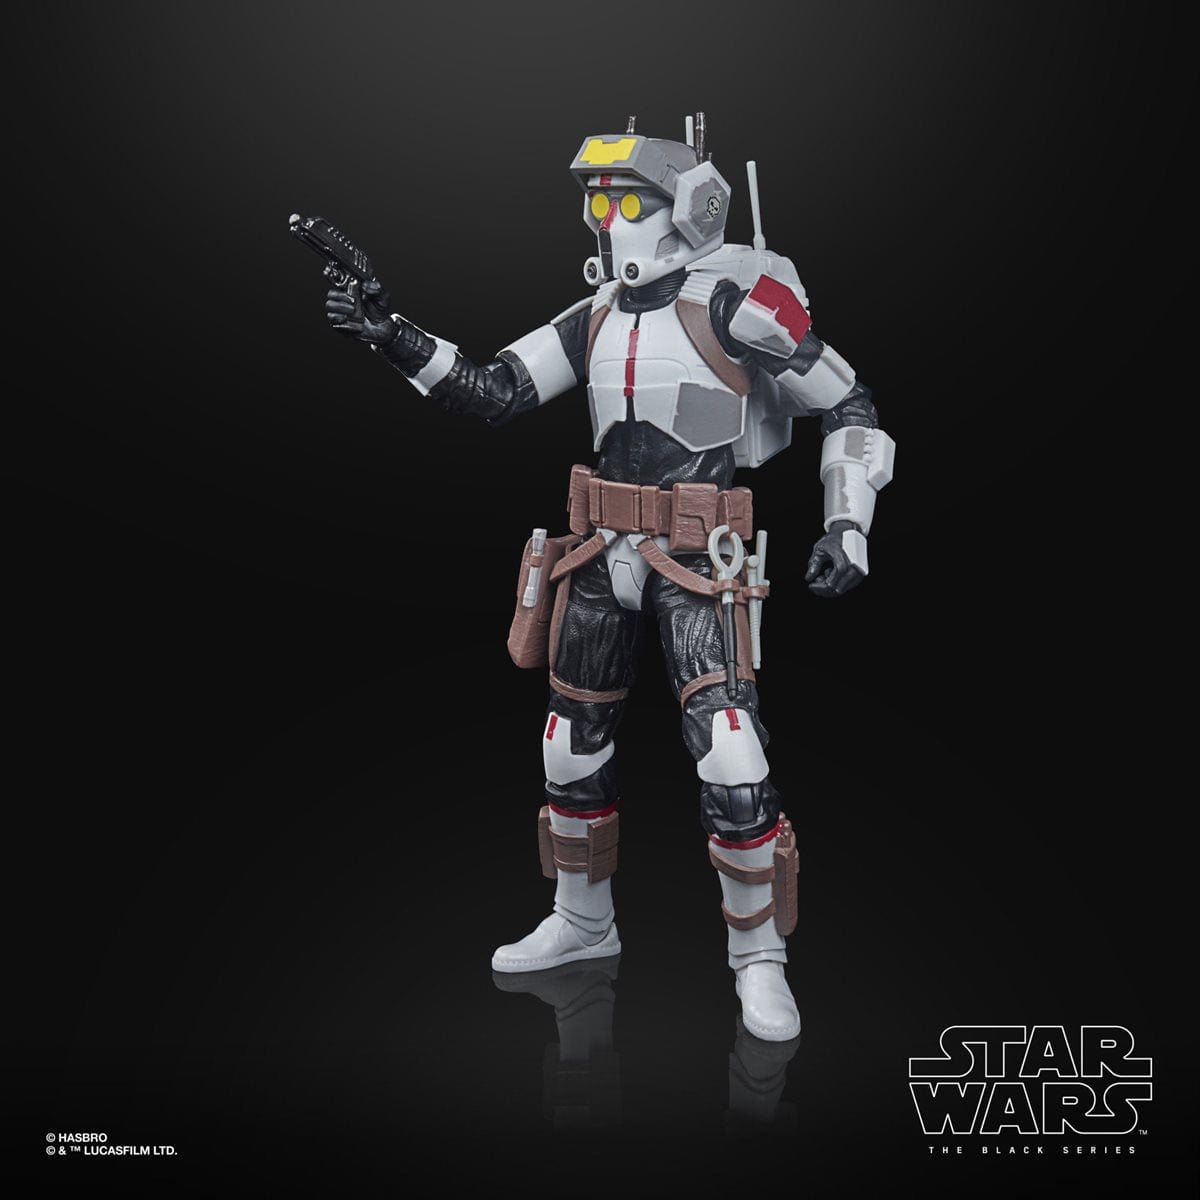 Star Wars The Black Series Tech Toy 6-Inch-Scale Star Wars: The Bad Batch Collectible Figure Media 7 of 10